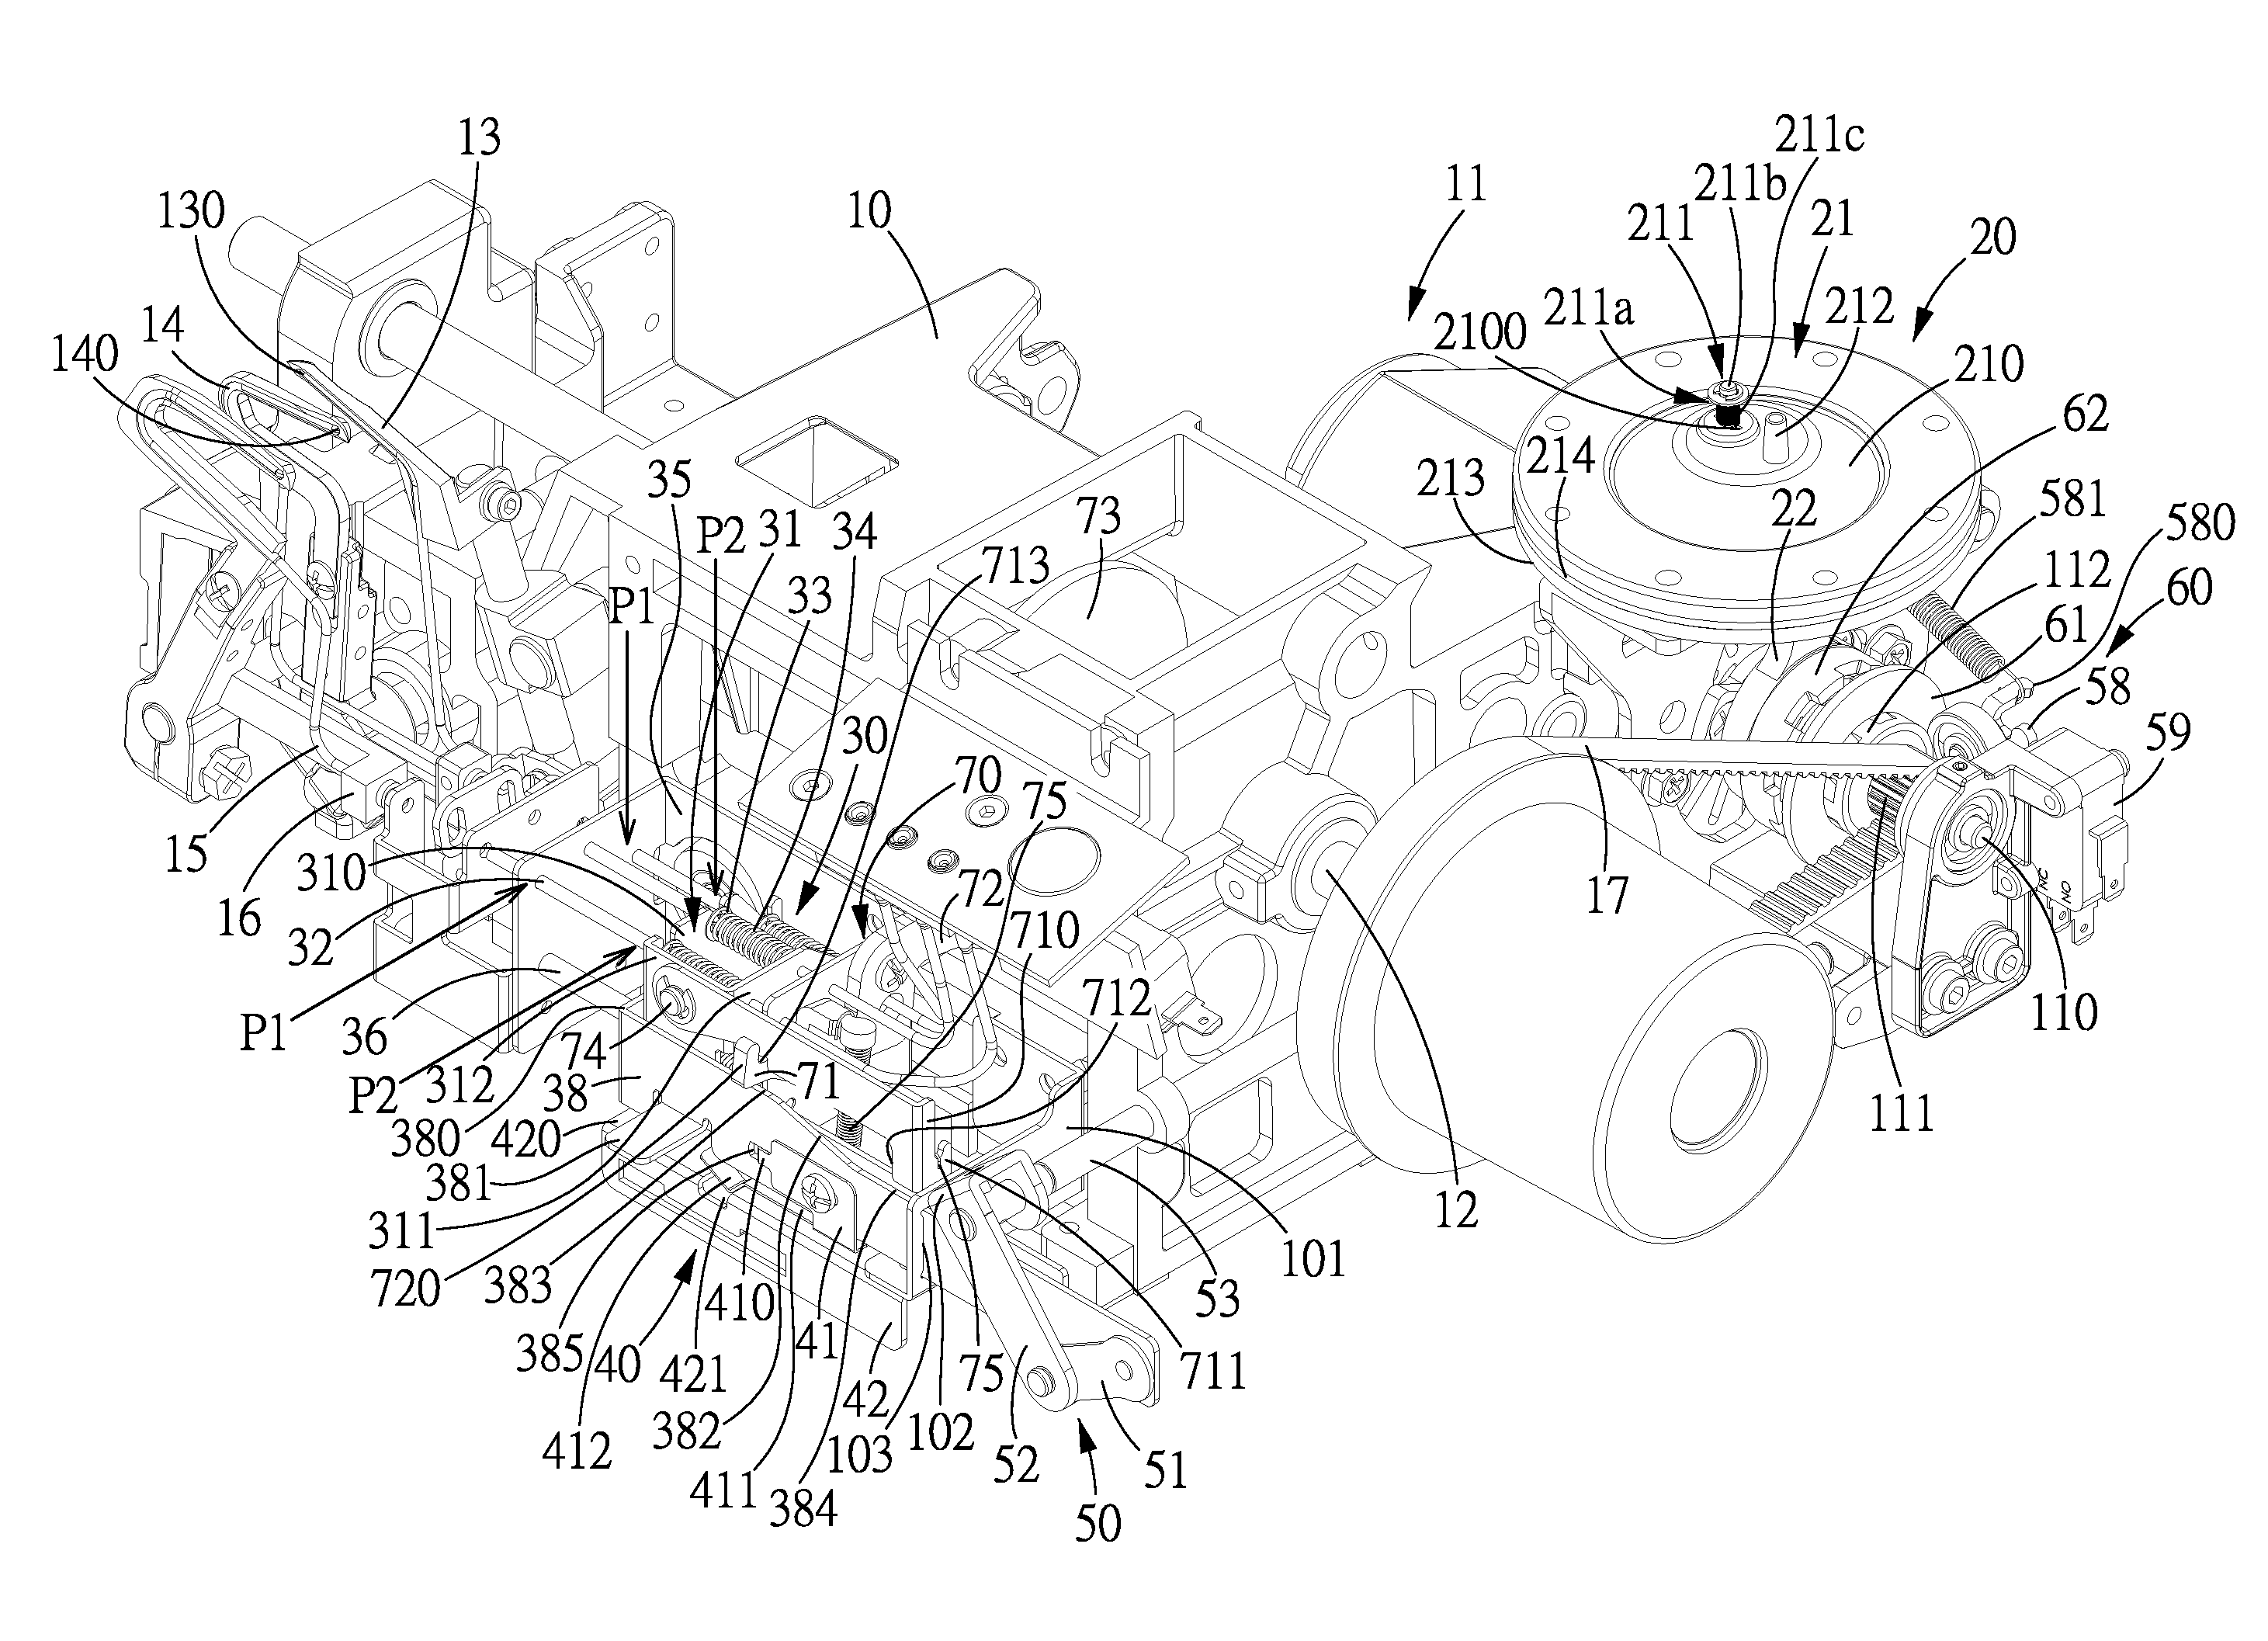 Sewing machine with a threading and air supply selecting device